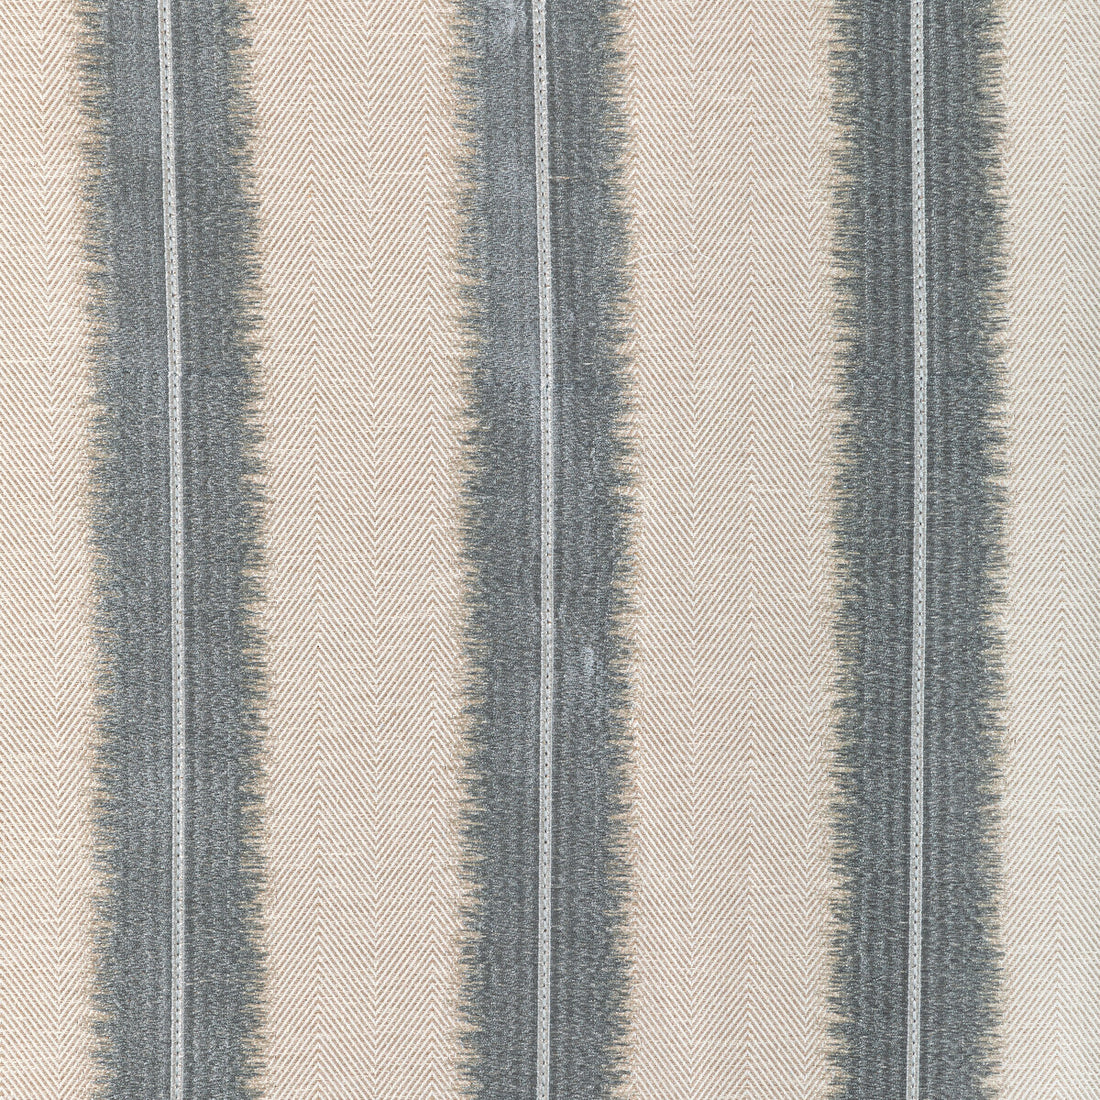 Etched Stripe fabric in fog color - pattern 36346.1611.0 - by Kravet Couture in the Modern Luxe III collection